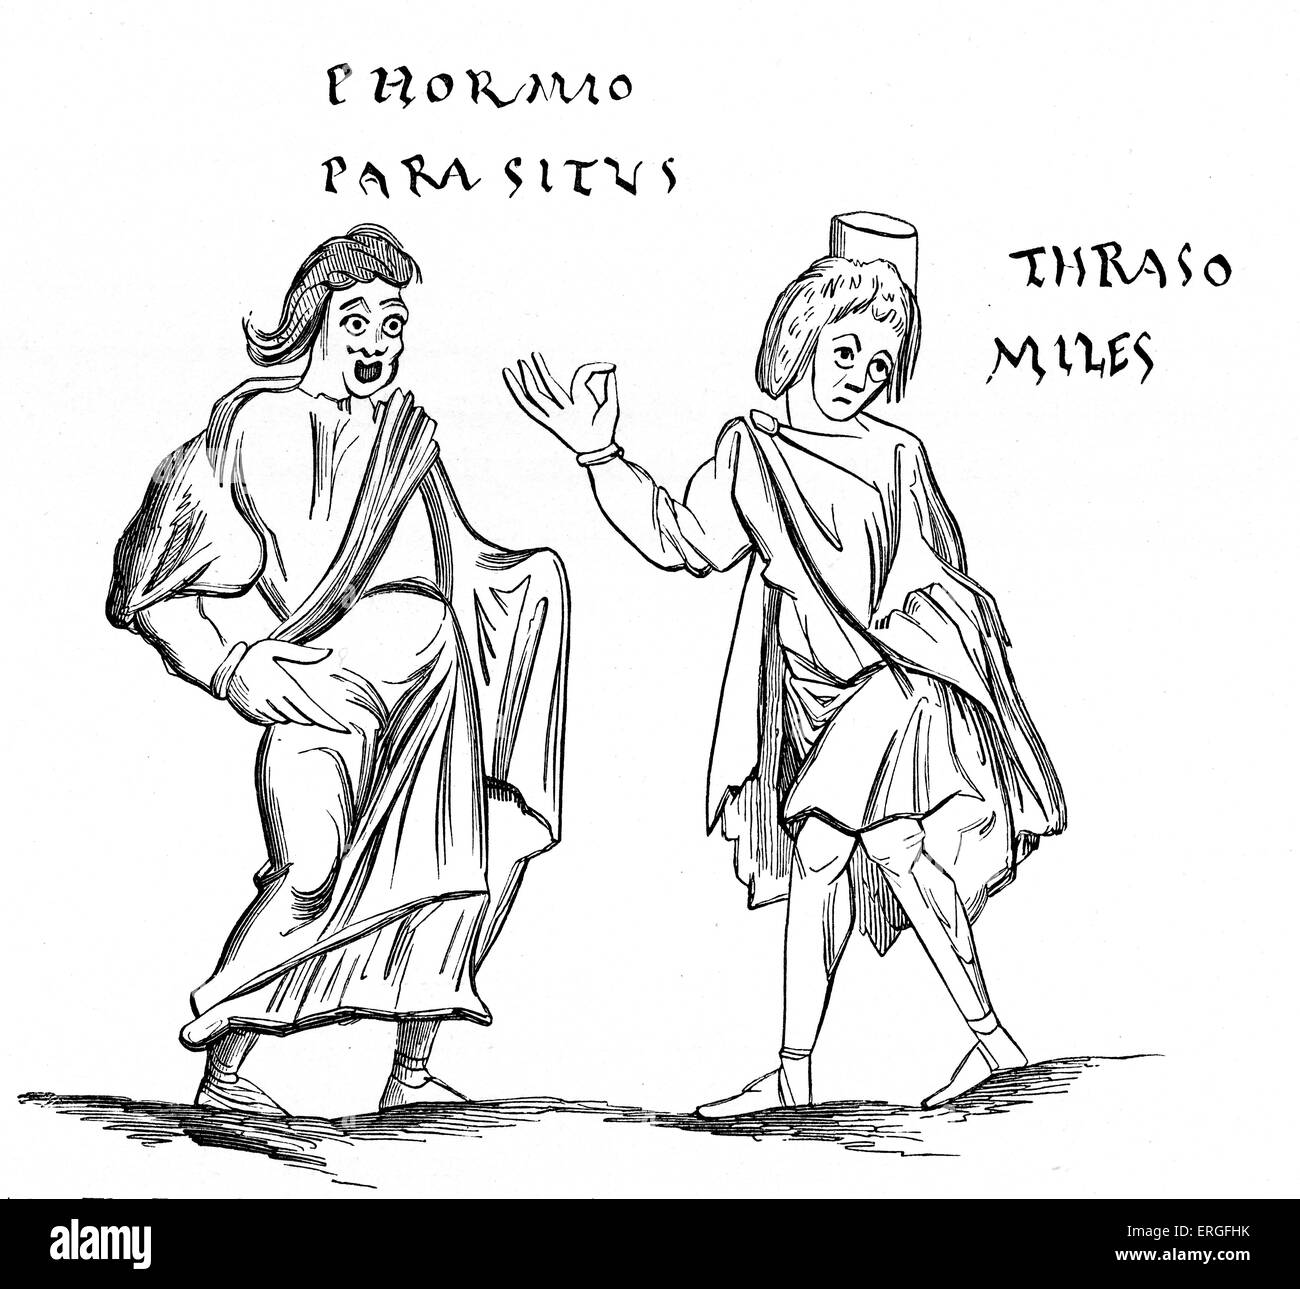 The Parasite and the Soldier  - represenative characters of Ancient Theatre, from Comedies of Terence. 10th century manuscript. Stock Photo